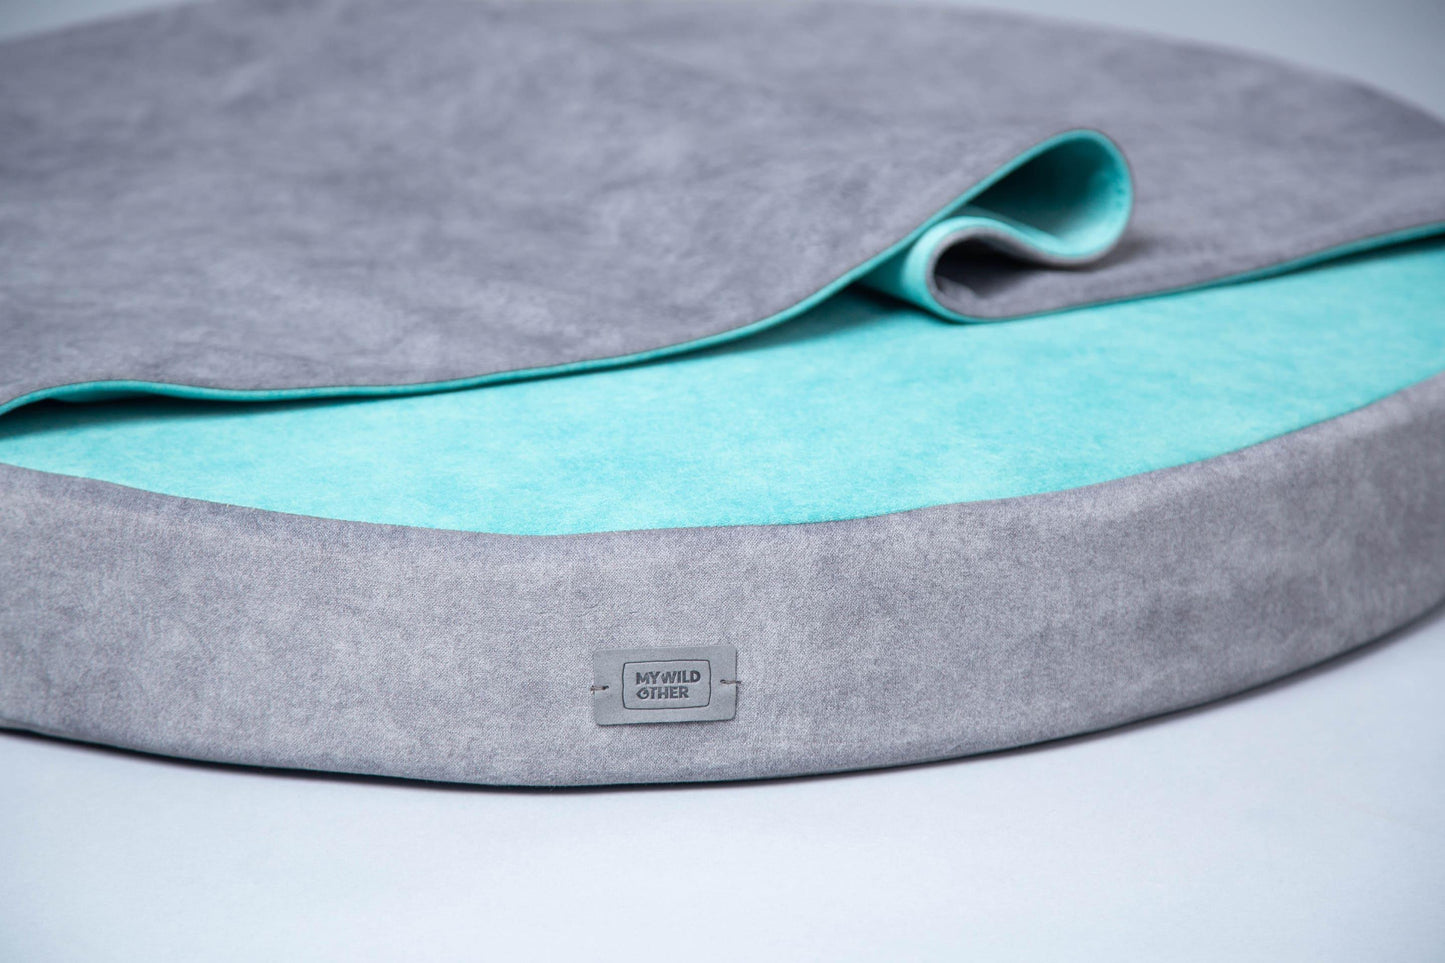 Cozy cave dog bed. GREY+MINT - European handmade dog accessories by My Wild Other